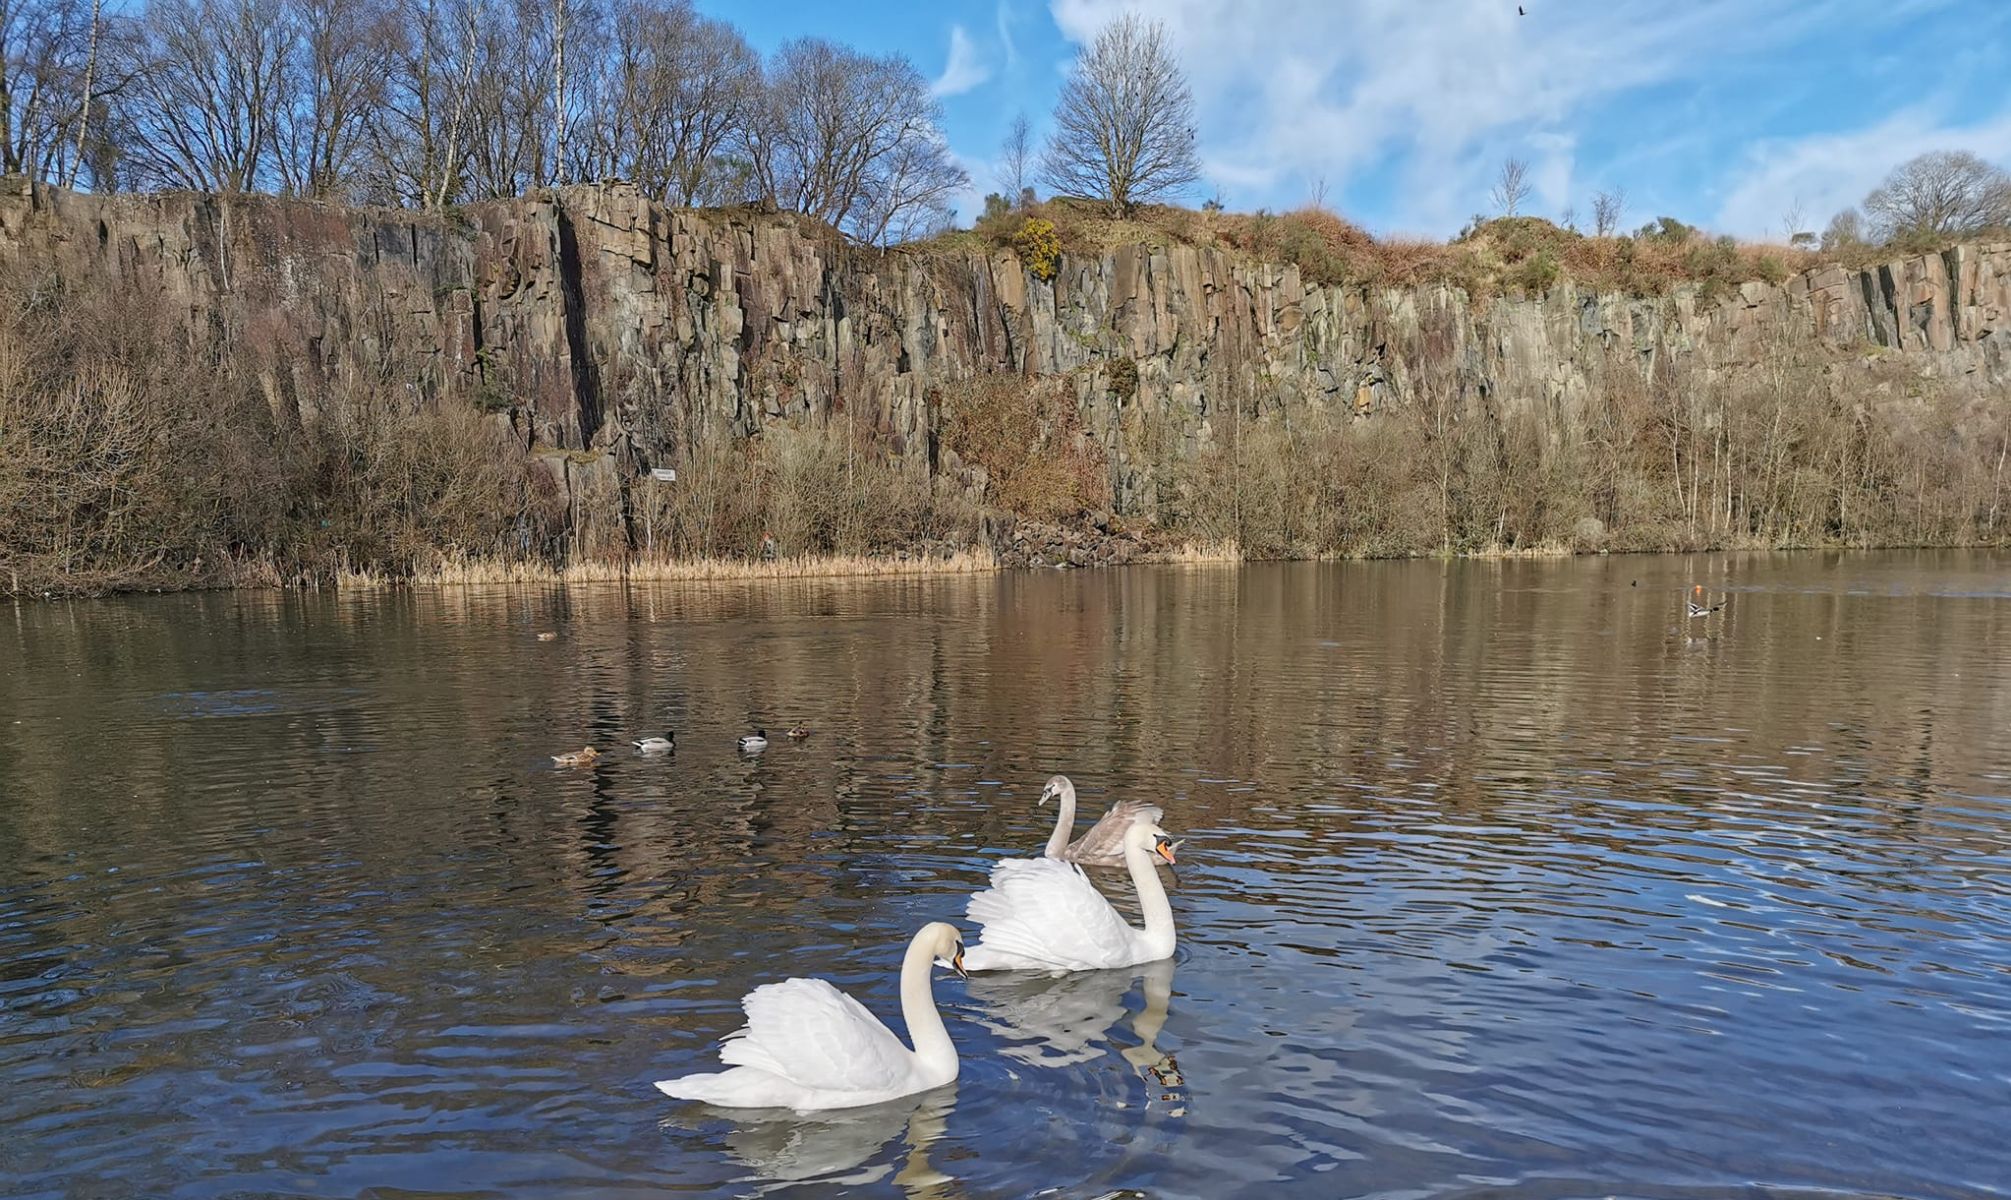 Swans in quarry at Auchinstarry Park at Kilsyth